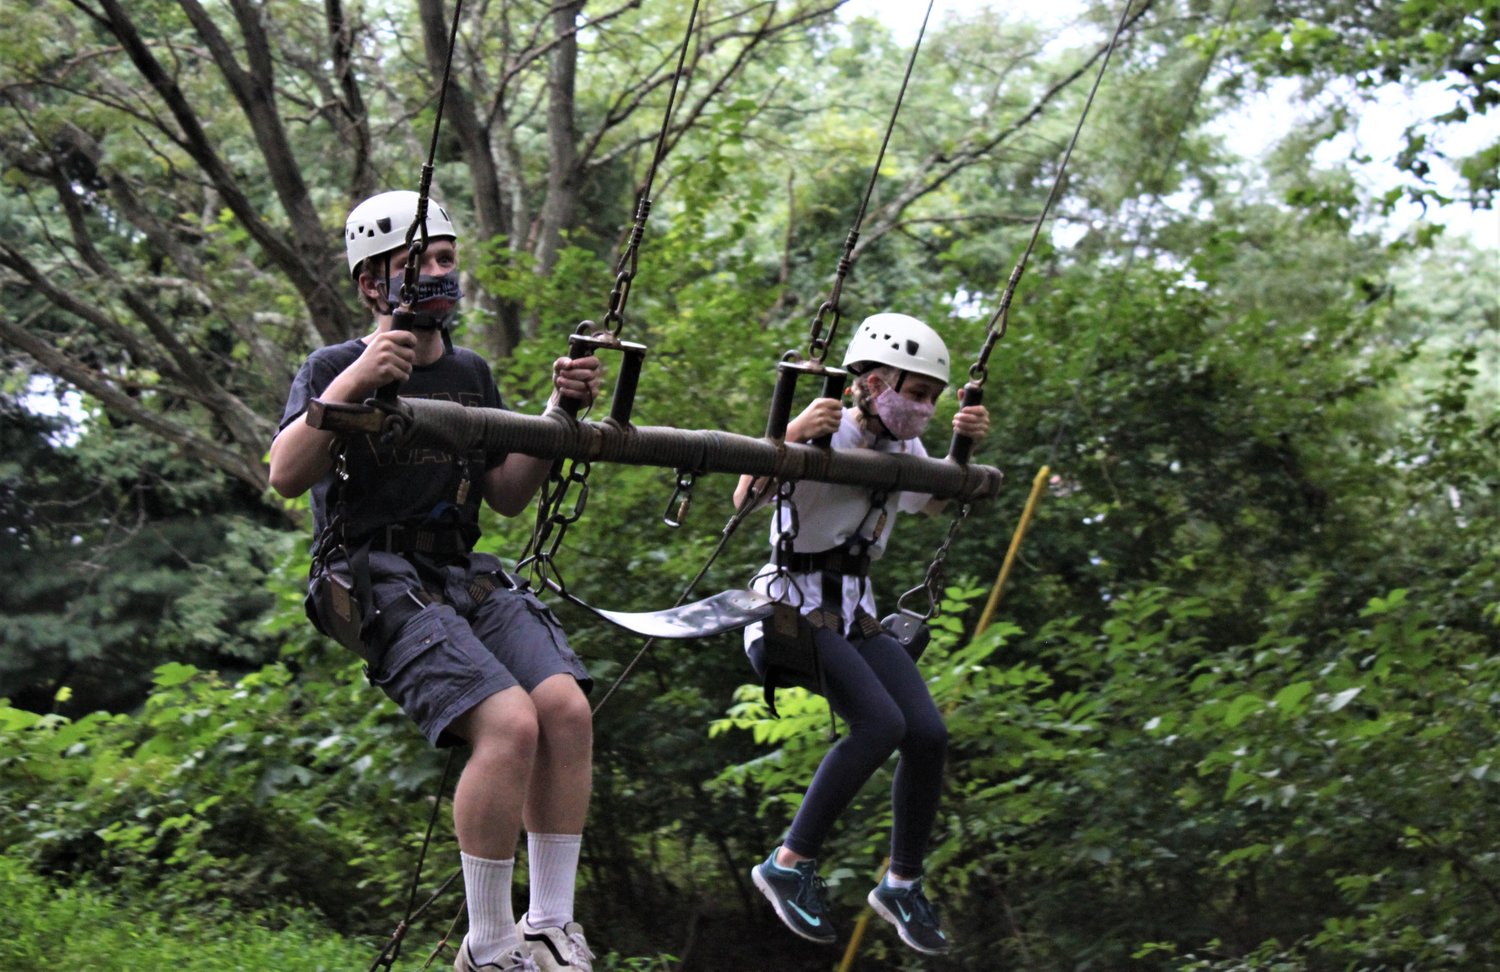 From left, Jeremiah Faust and Lillian Cross rode in a swing that flew high into the tree canopy during Camp Phoenix Teen Grief Camp held at Terrapin Adventures in Savage, Maryland.